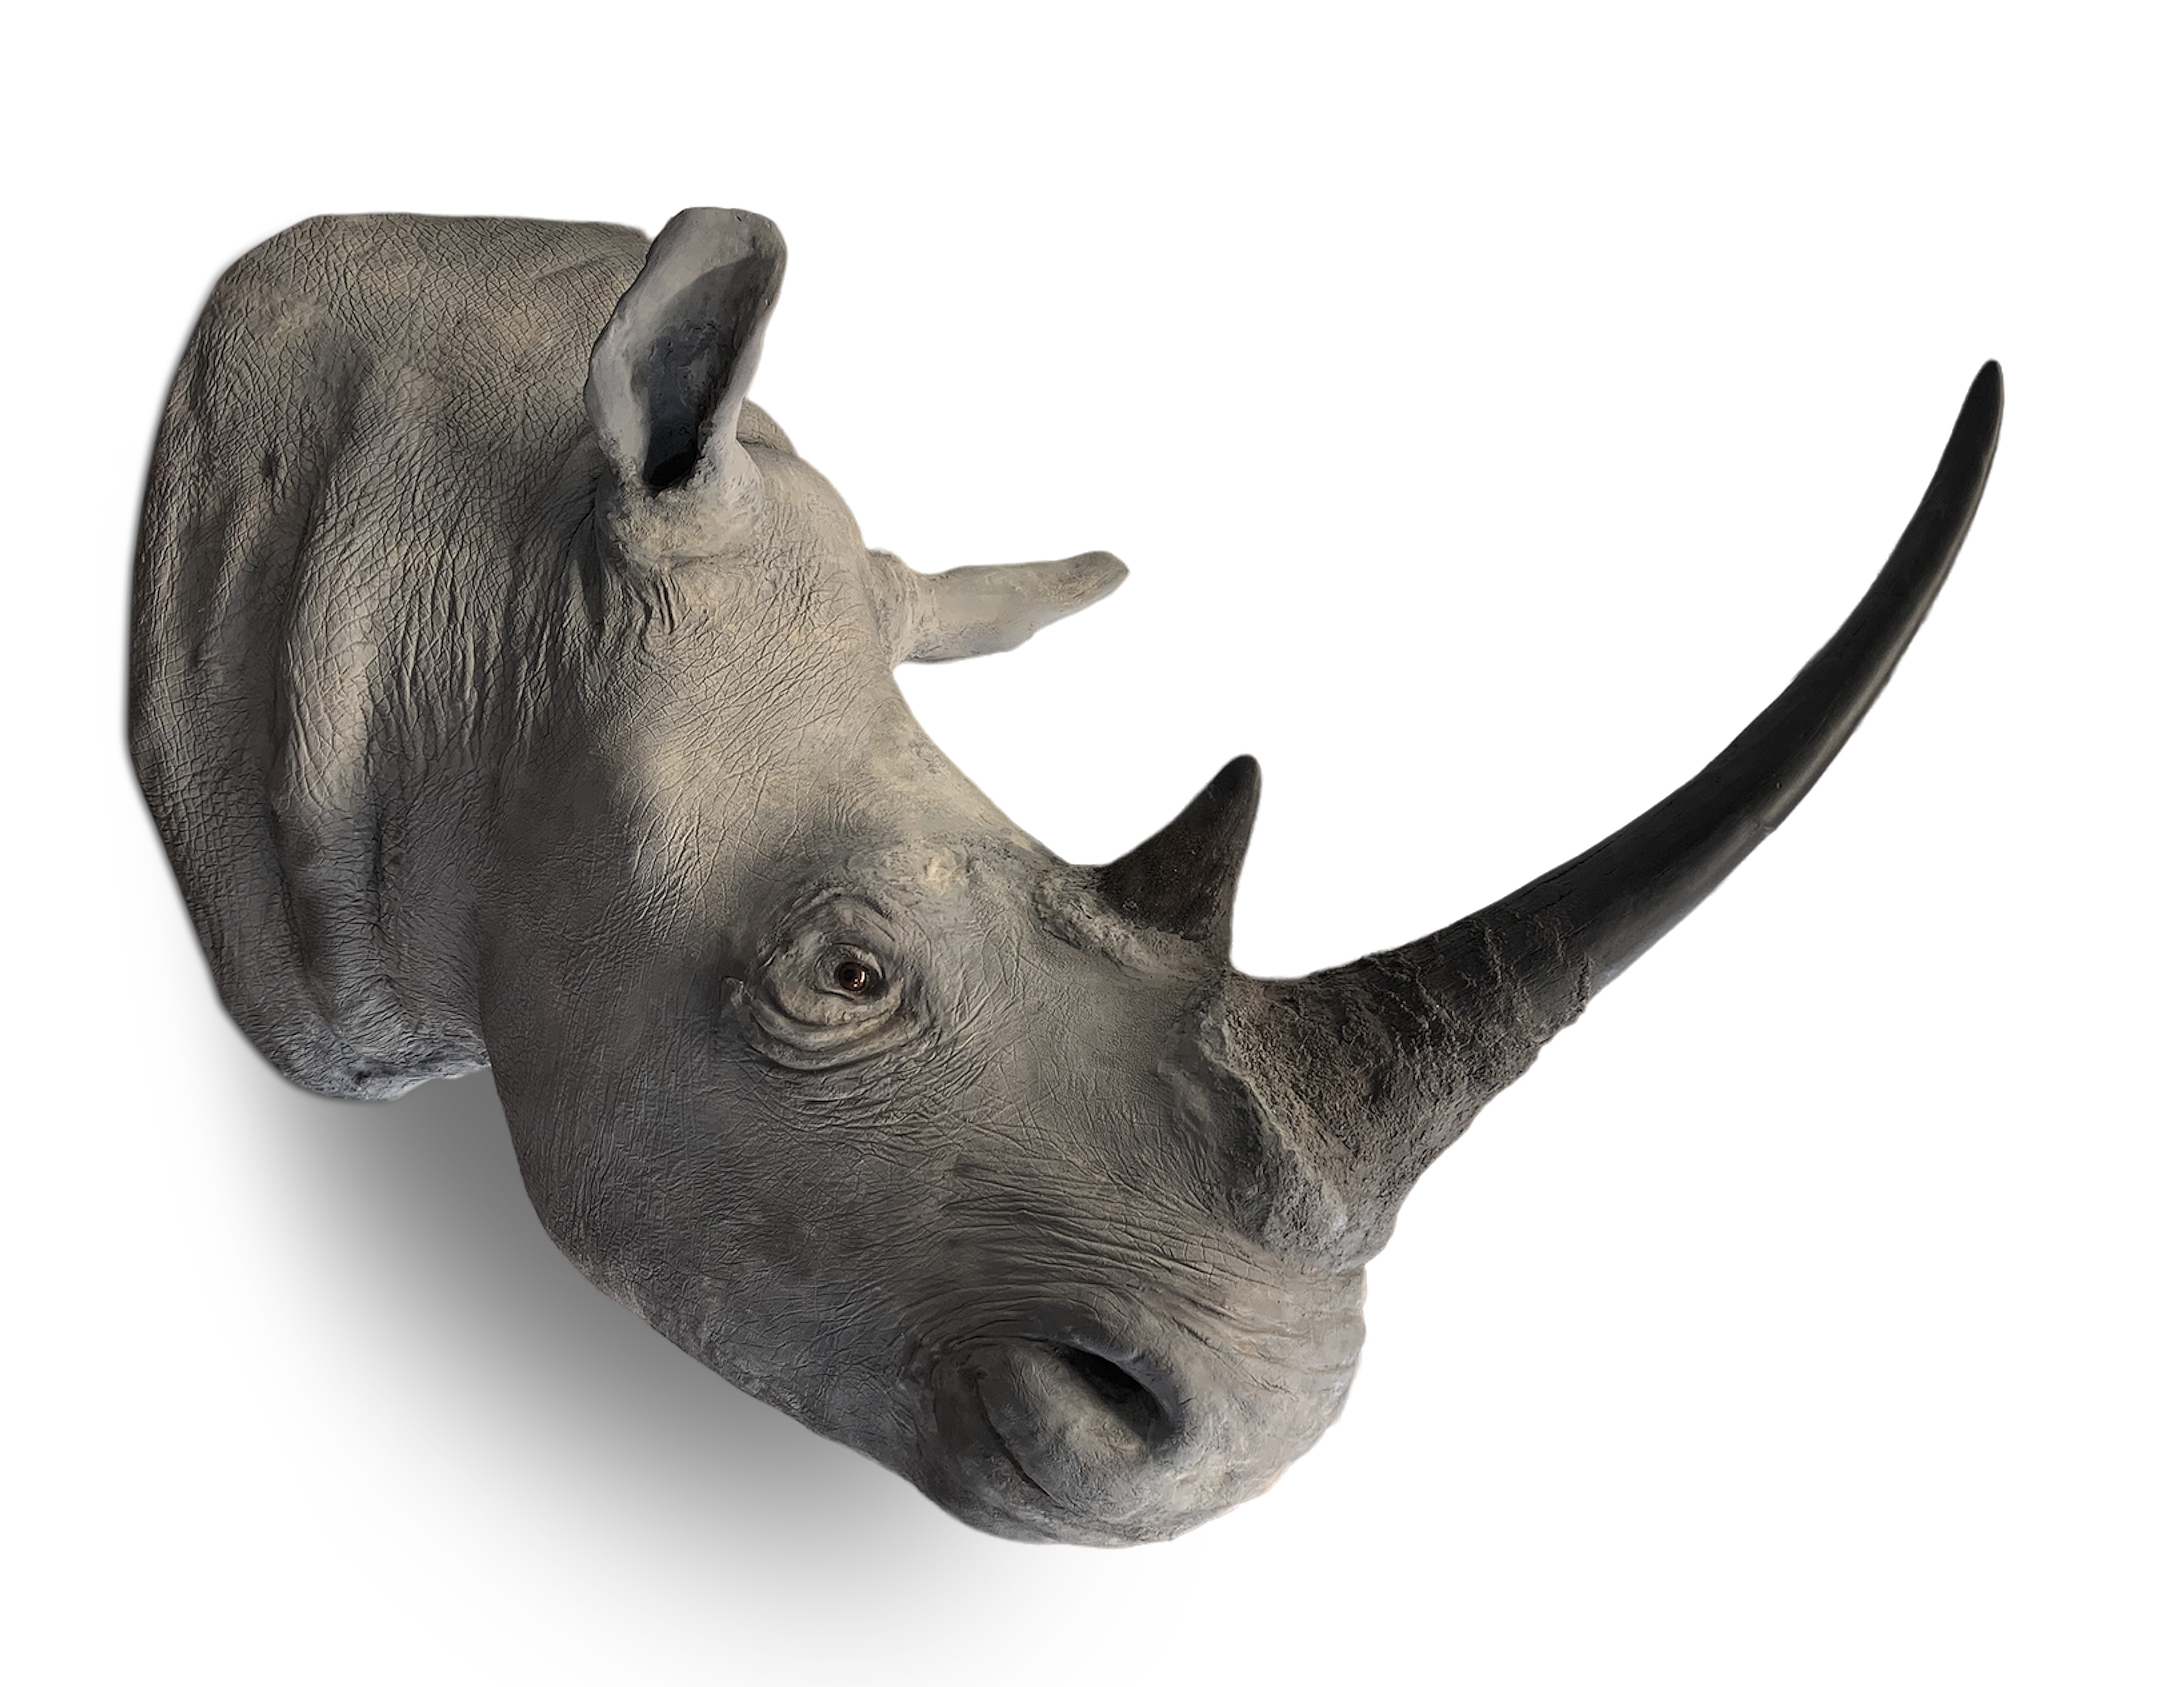 ROWLAND WARD OF PICCADILLY, LONDON, VICTORIAN TAXIDERMY WHITE RHINOCEROS HEAD (CERATOTHERIUM SIMUM) - Image 4 of 12